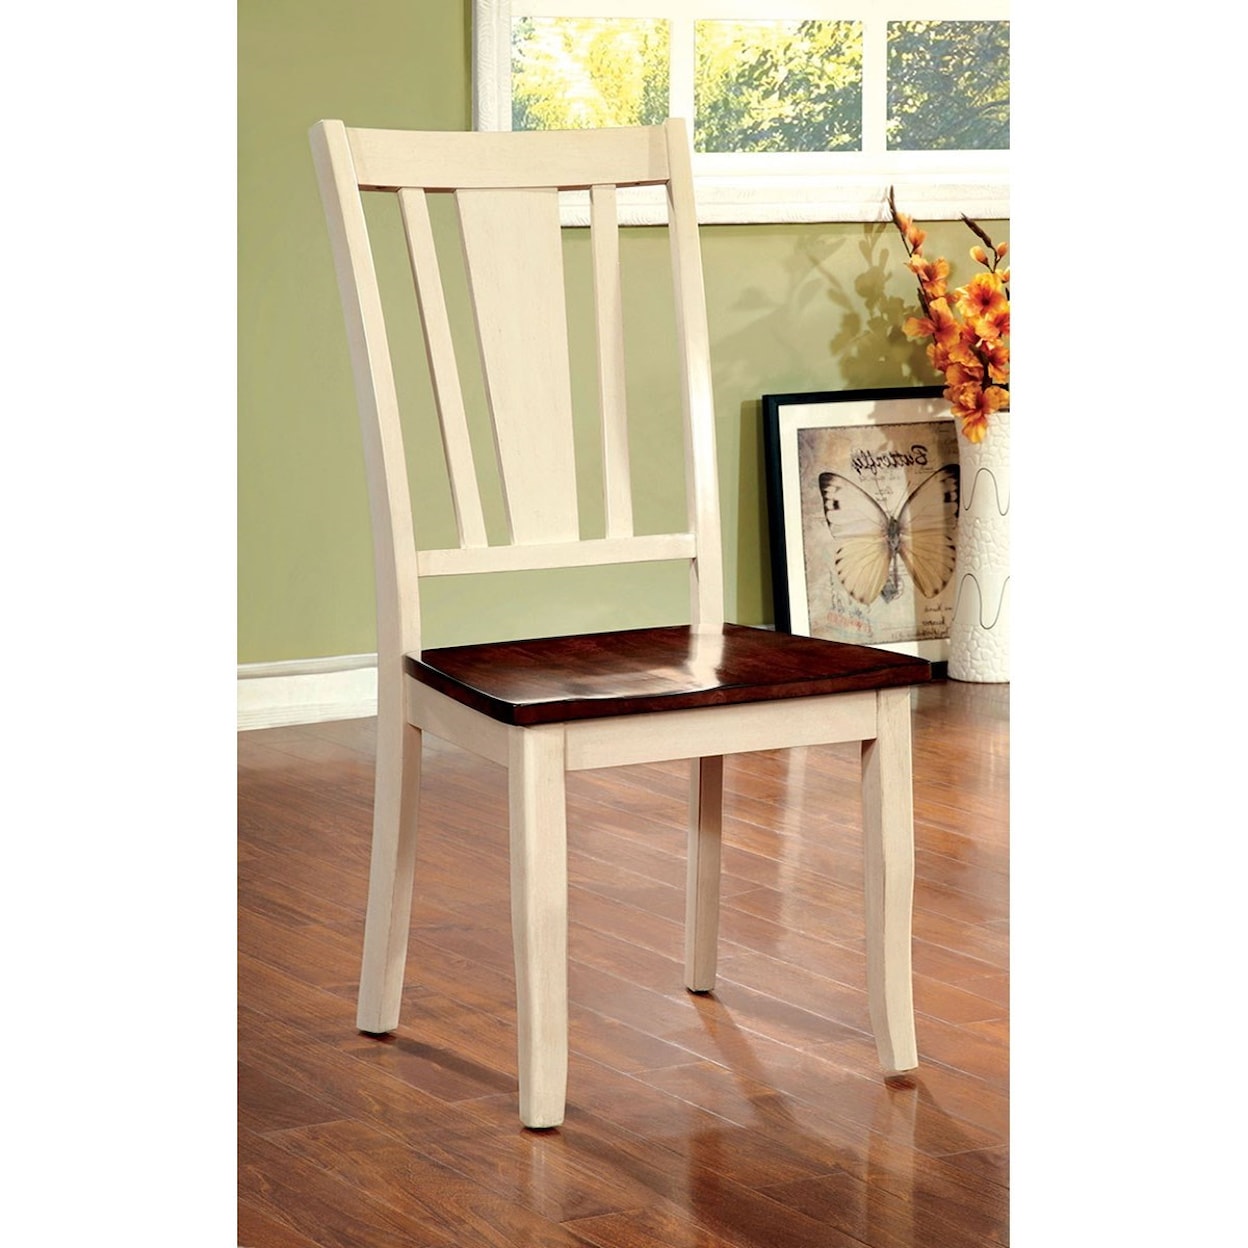 Furniture of America Dover II Round Table w/ Drop Leaf